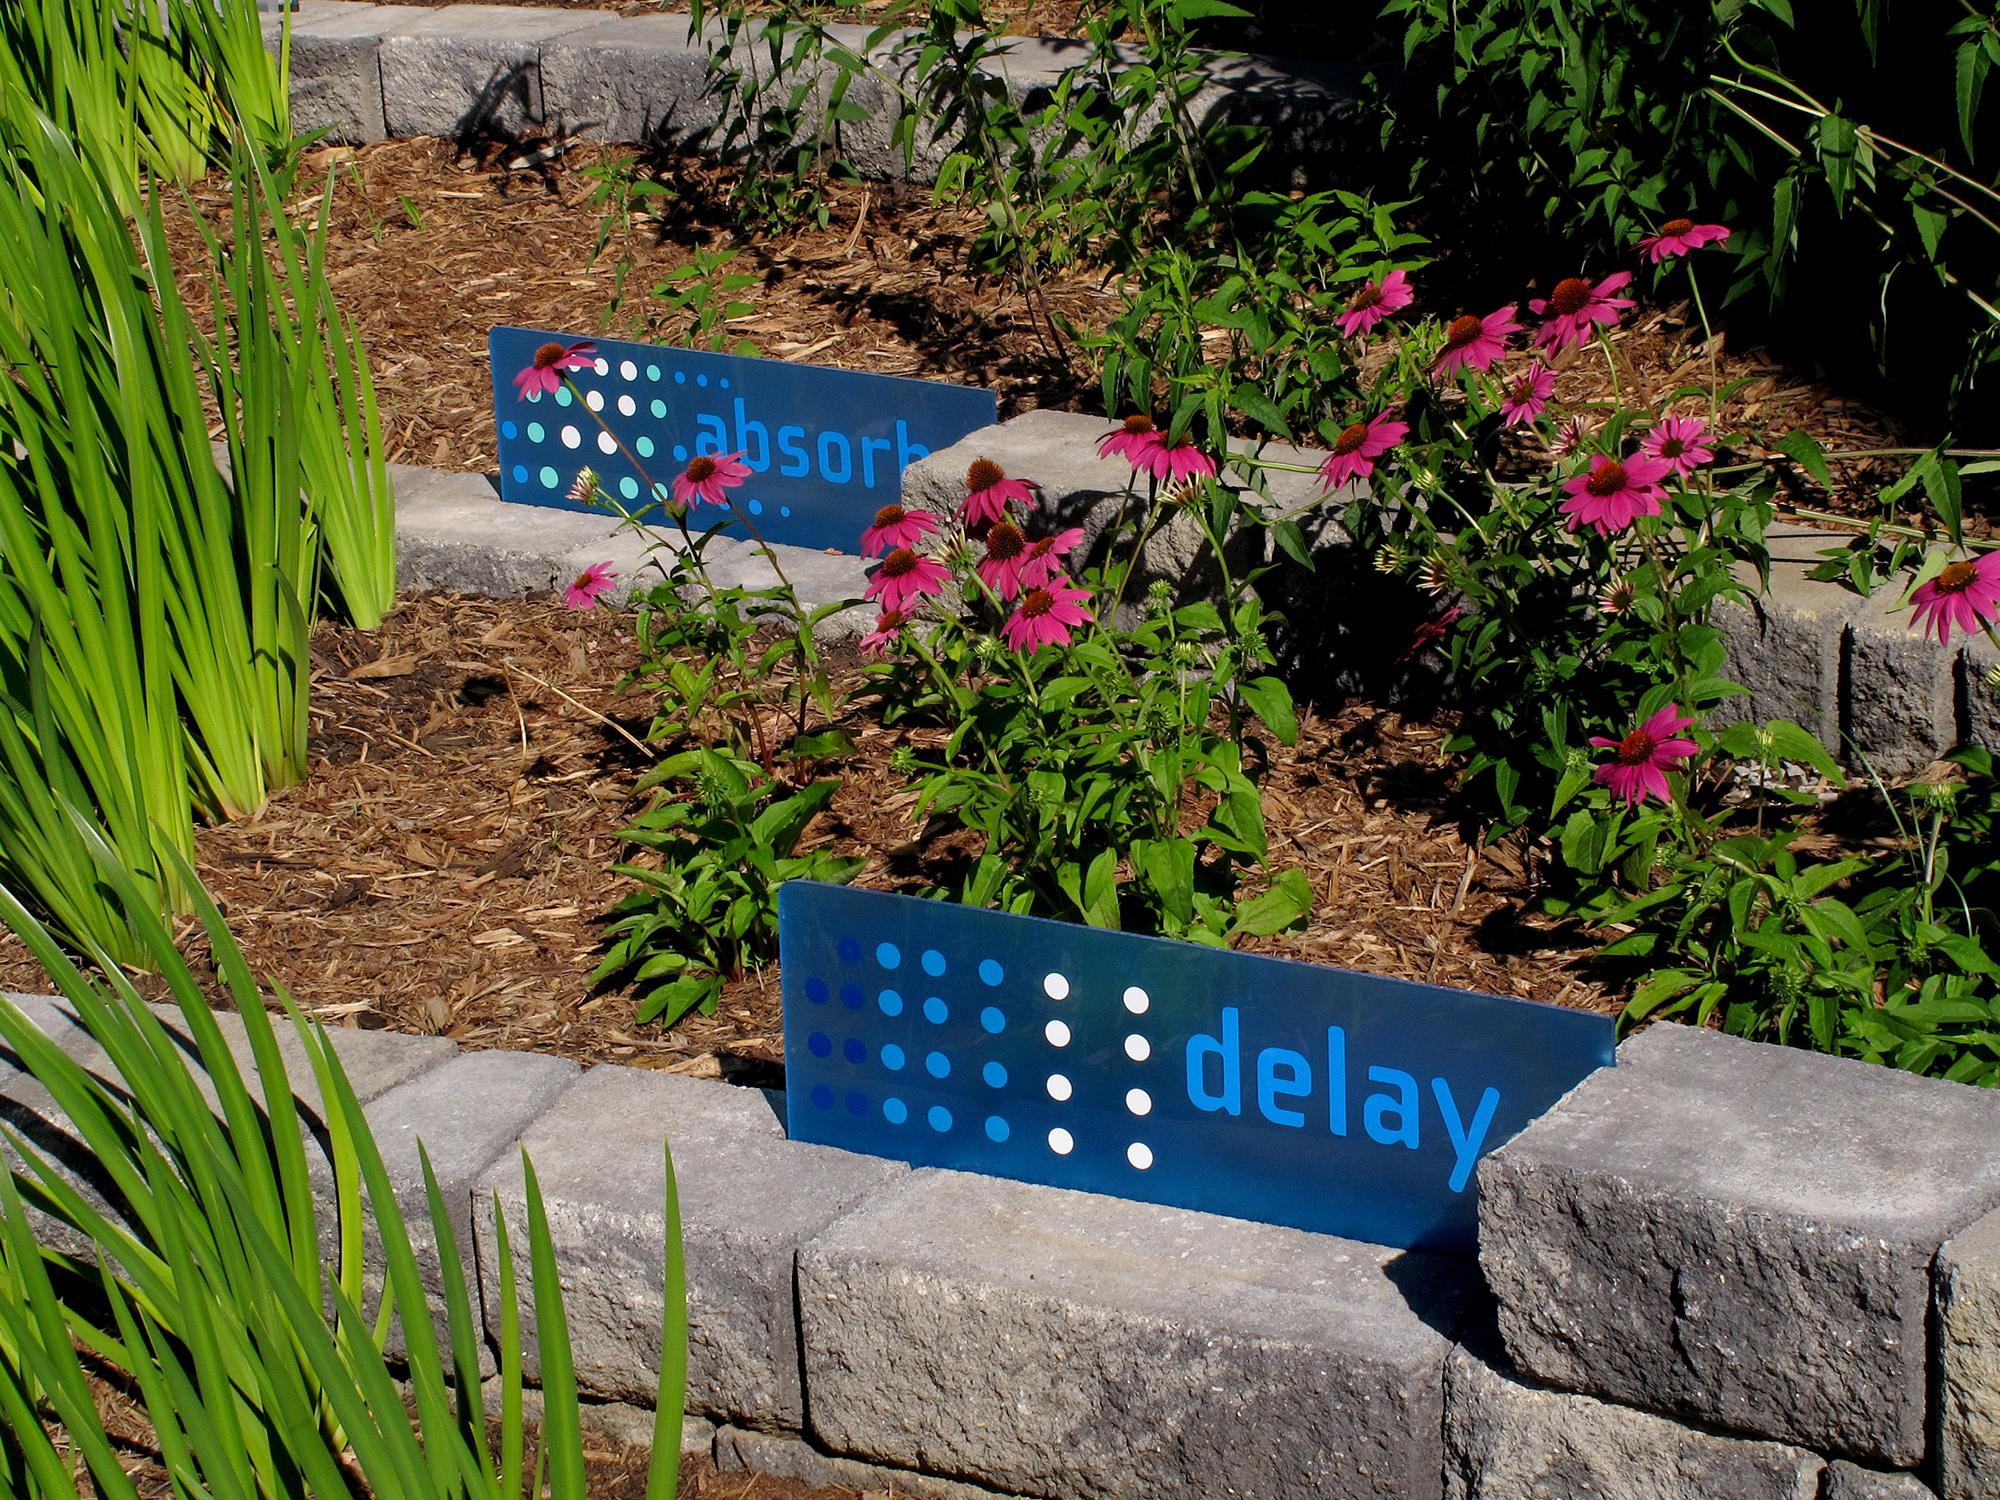 Blue signs stating “absorb” and “delay” mark brick tiers in a landscape growing pink flowers and reed-like stems.